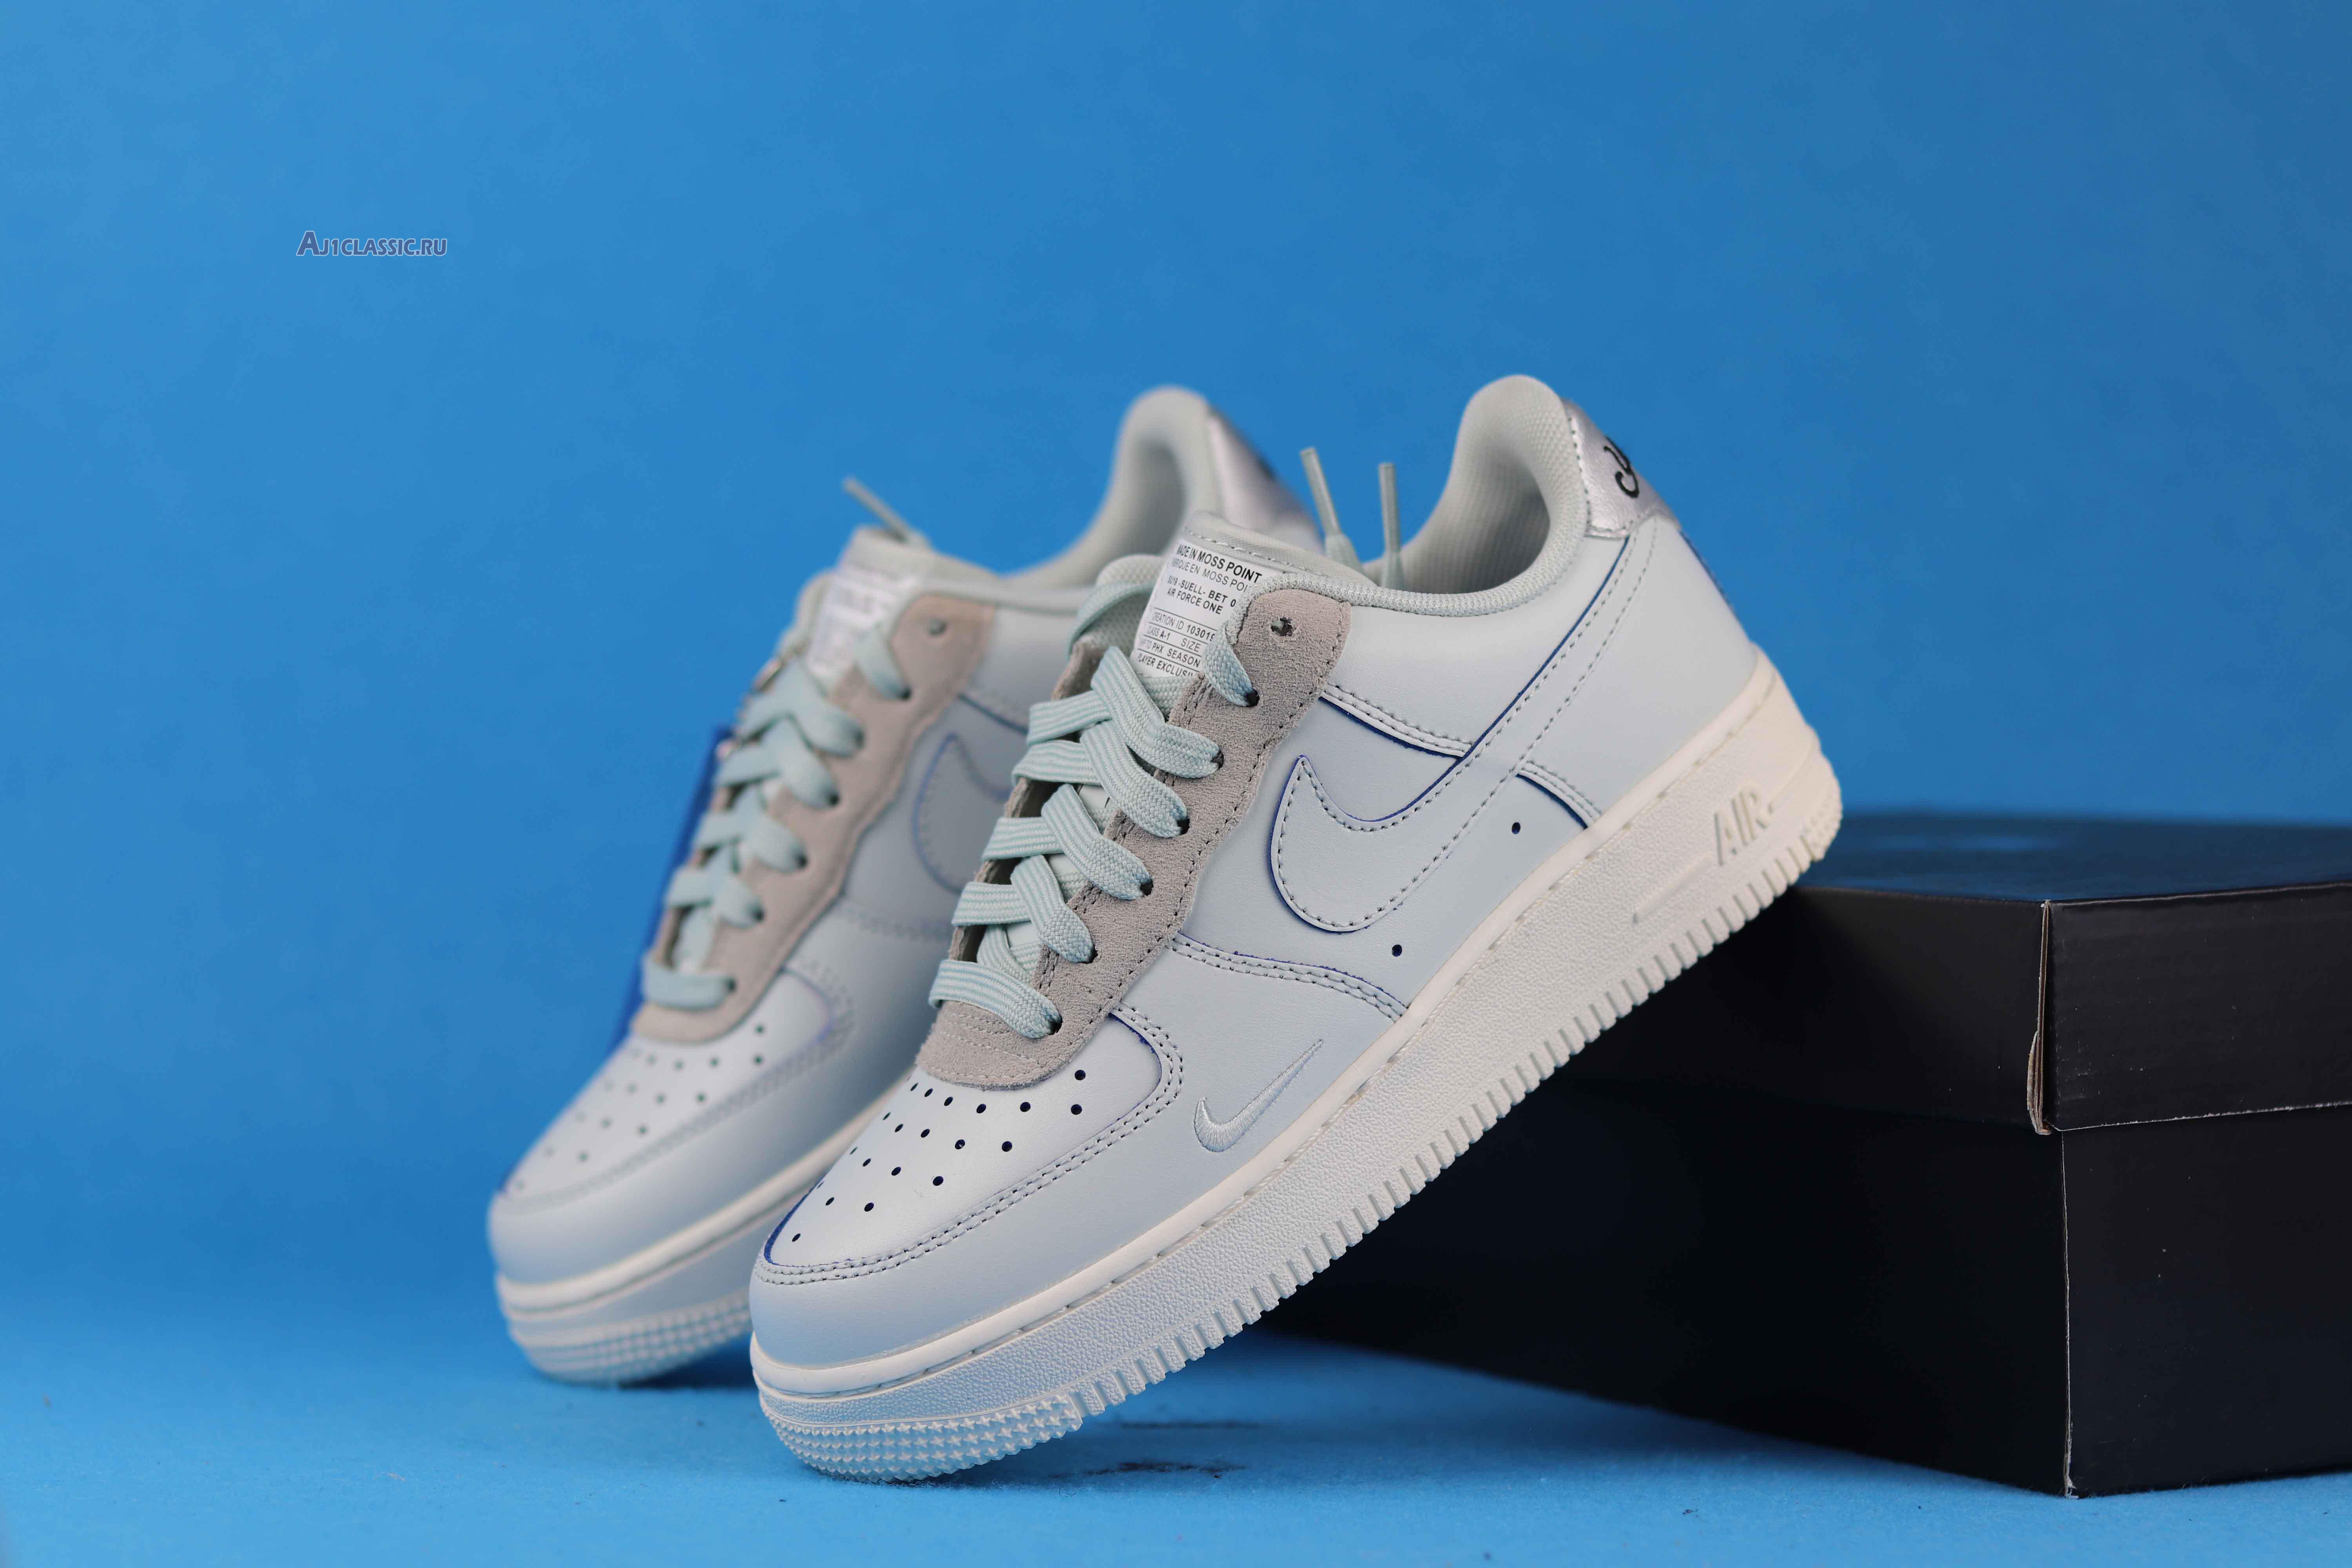 Devin Booker x Nike Air Force 1 Low LV8 "Moss Point" PE CJ9716-001